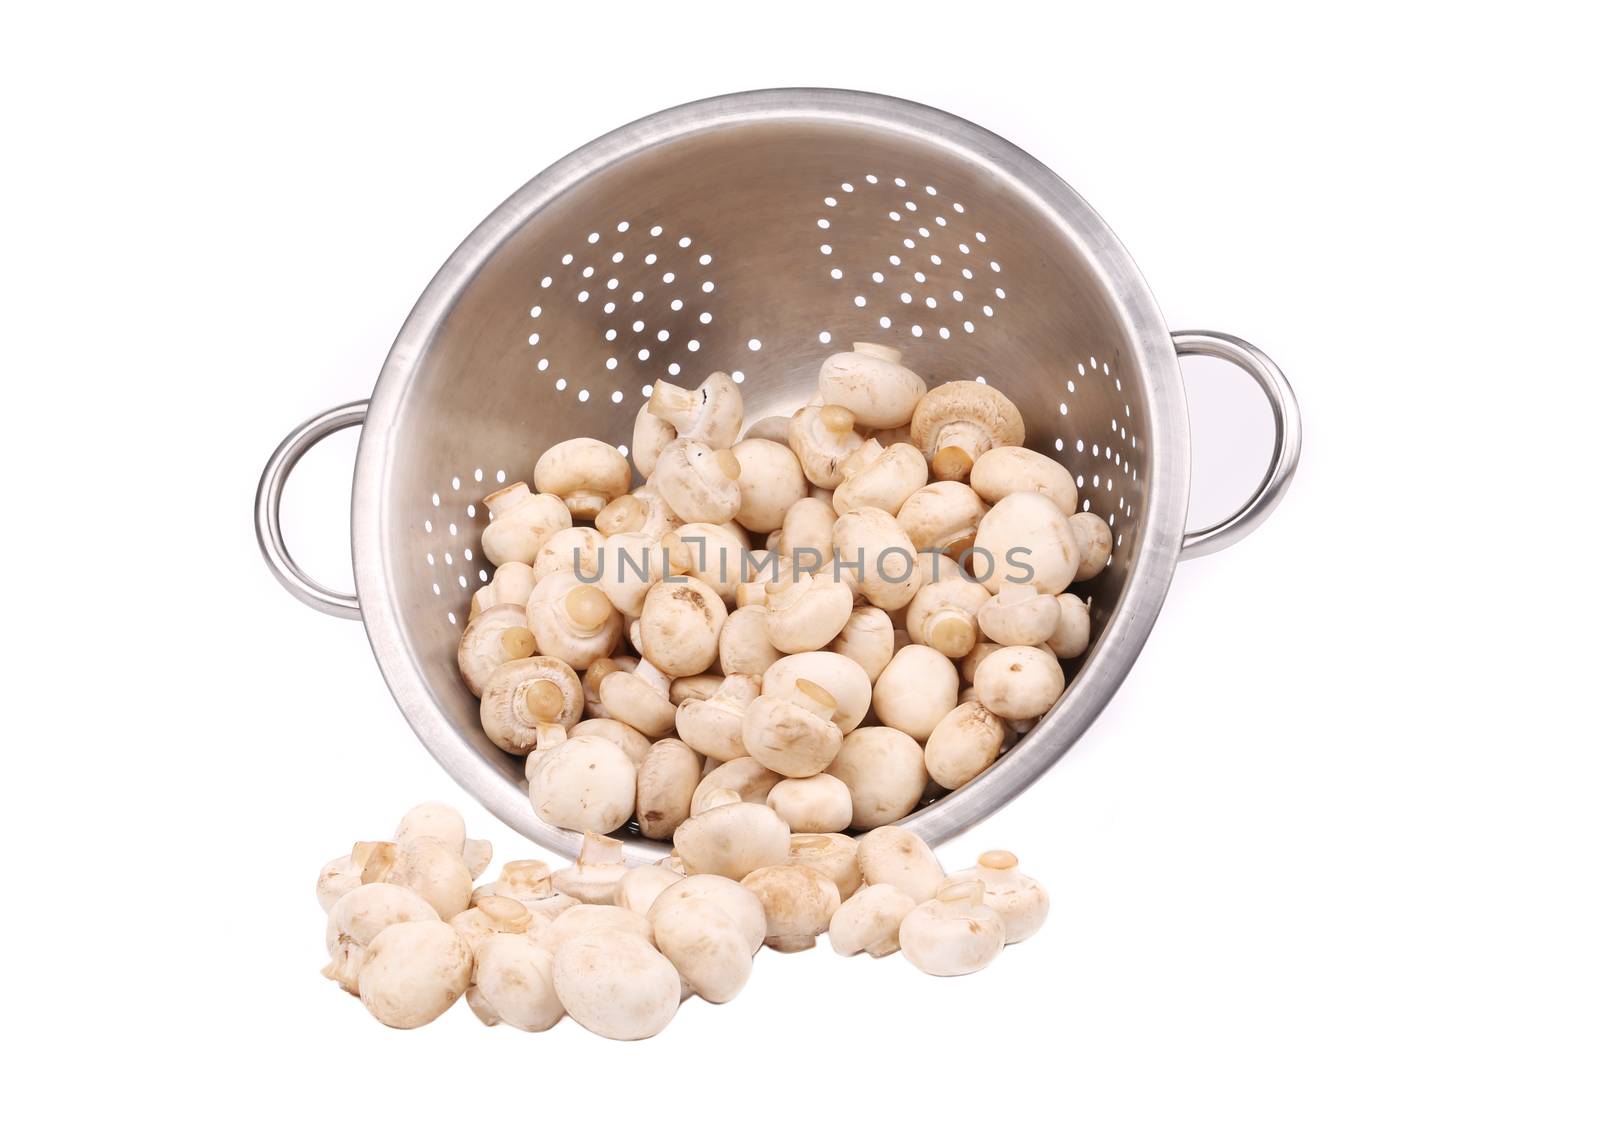 Metal colander with fresh champignon mushrooms. Isolated on a white background.